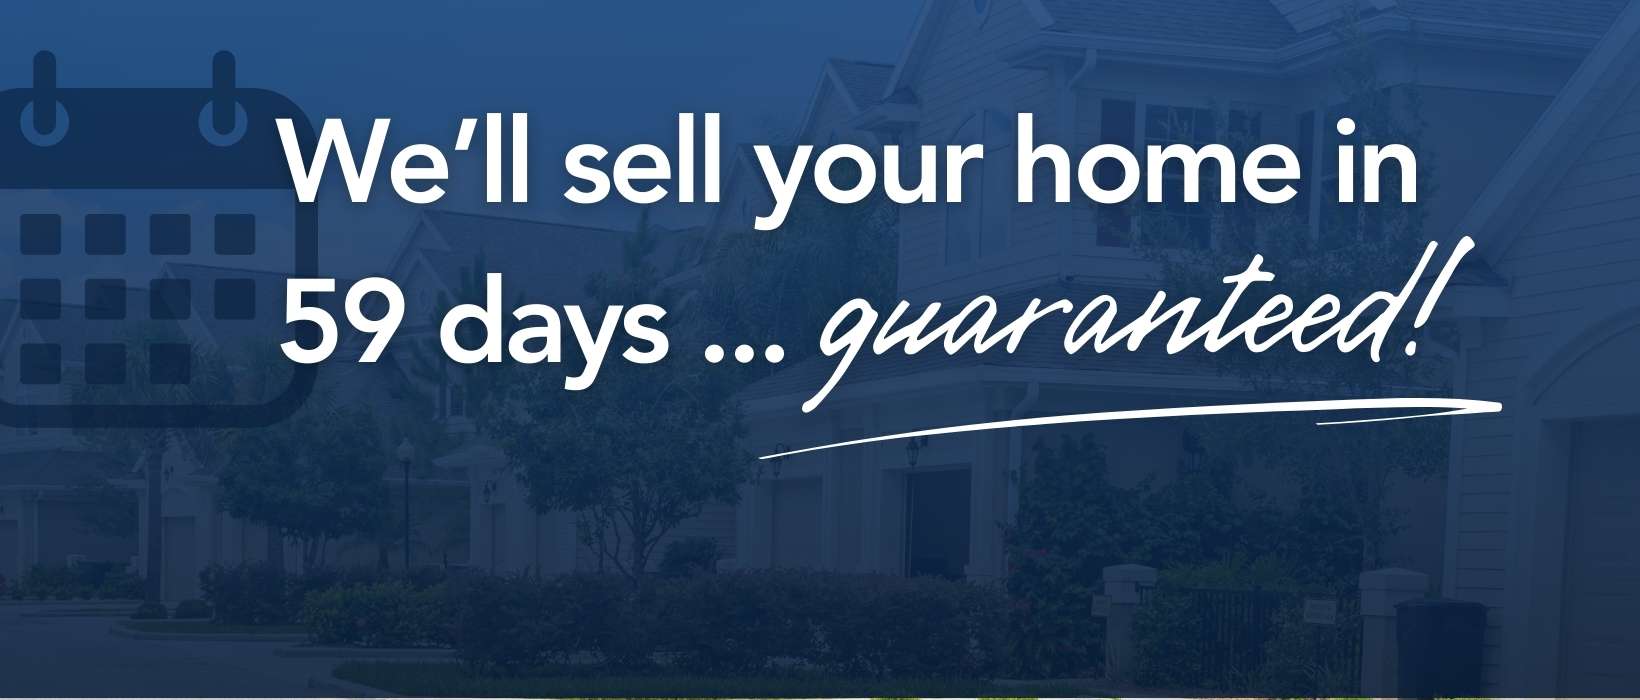 We'll sell your home in 59 days...guaranteed!